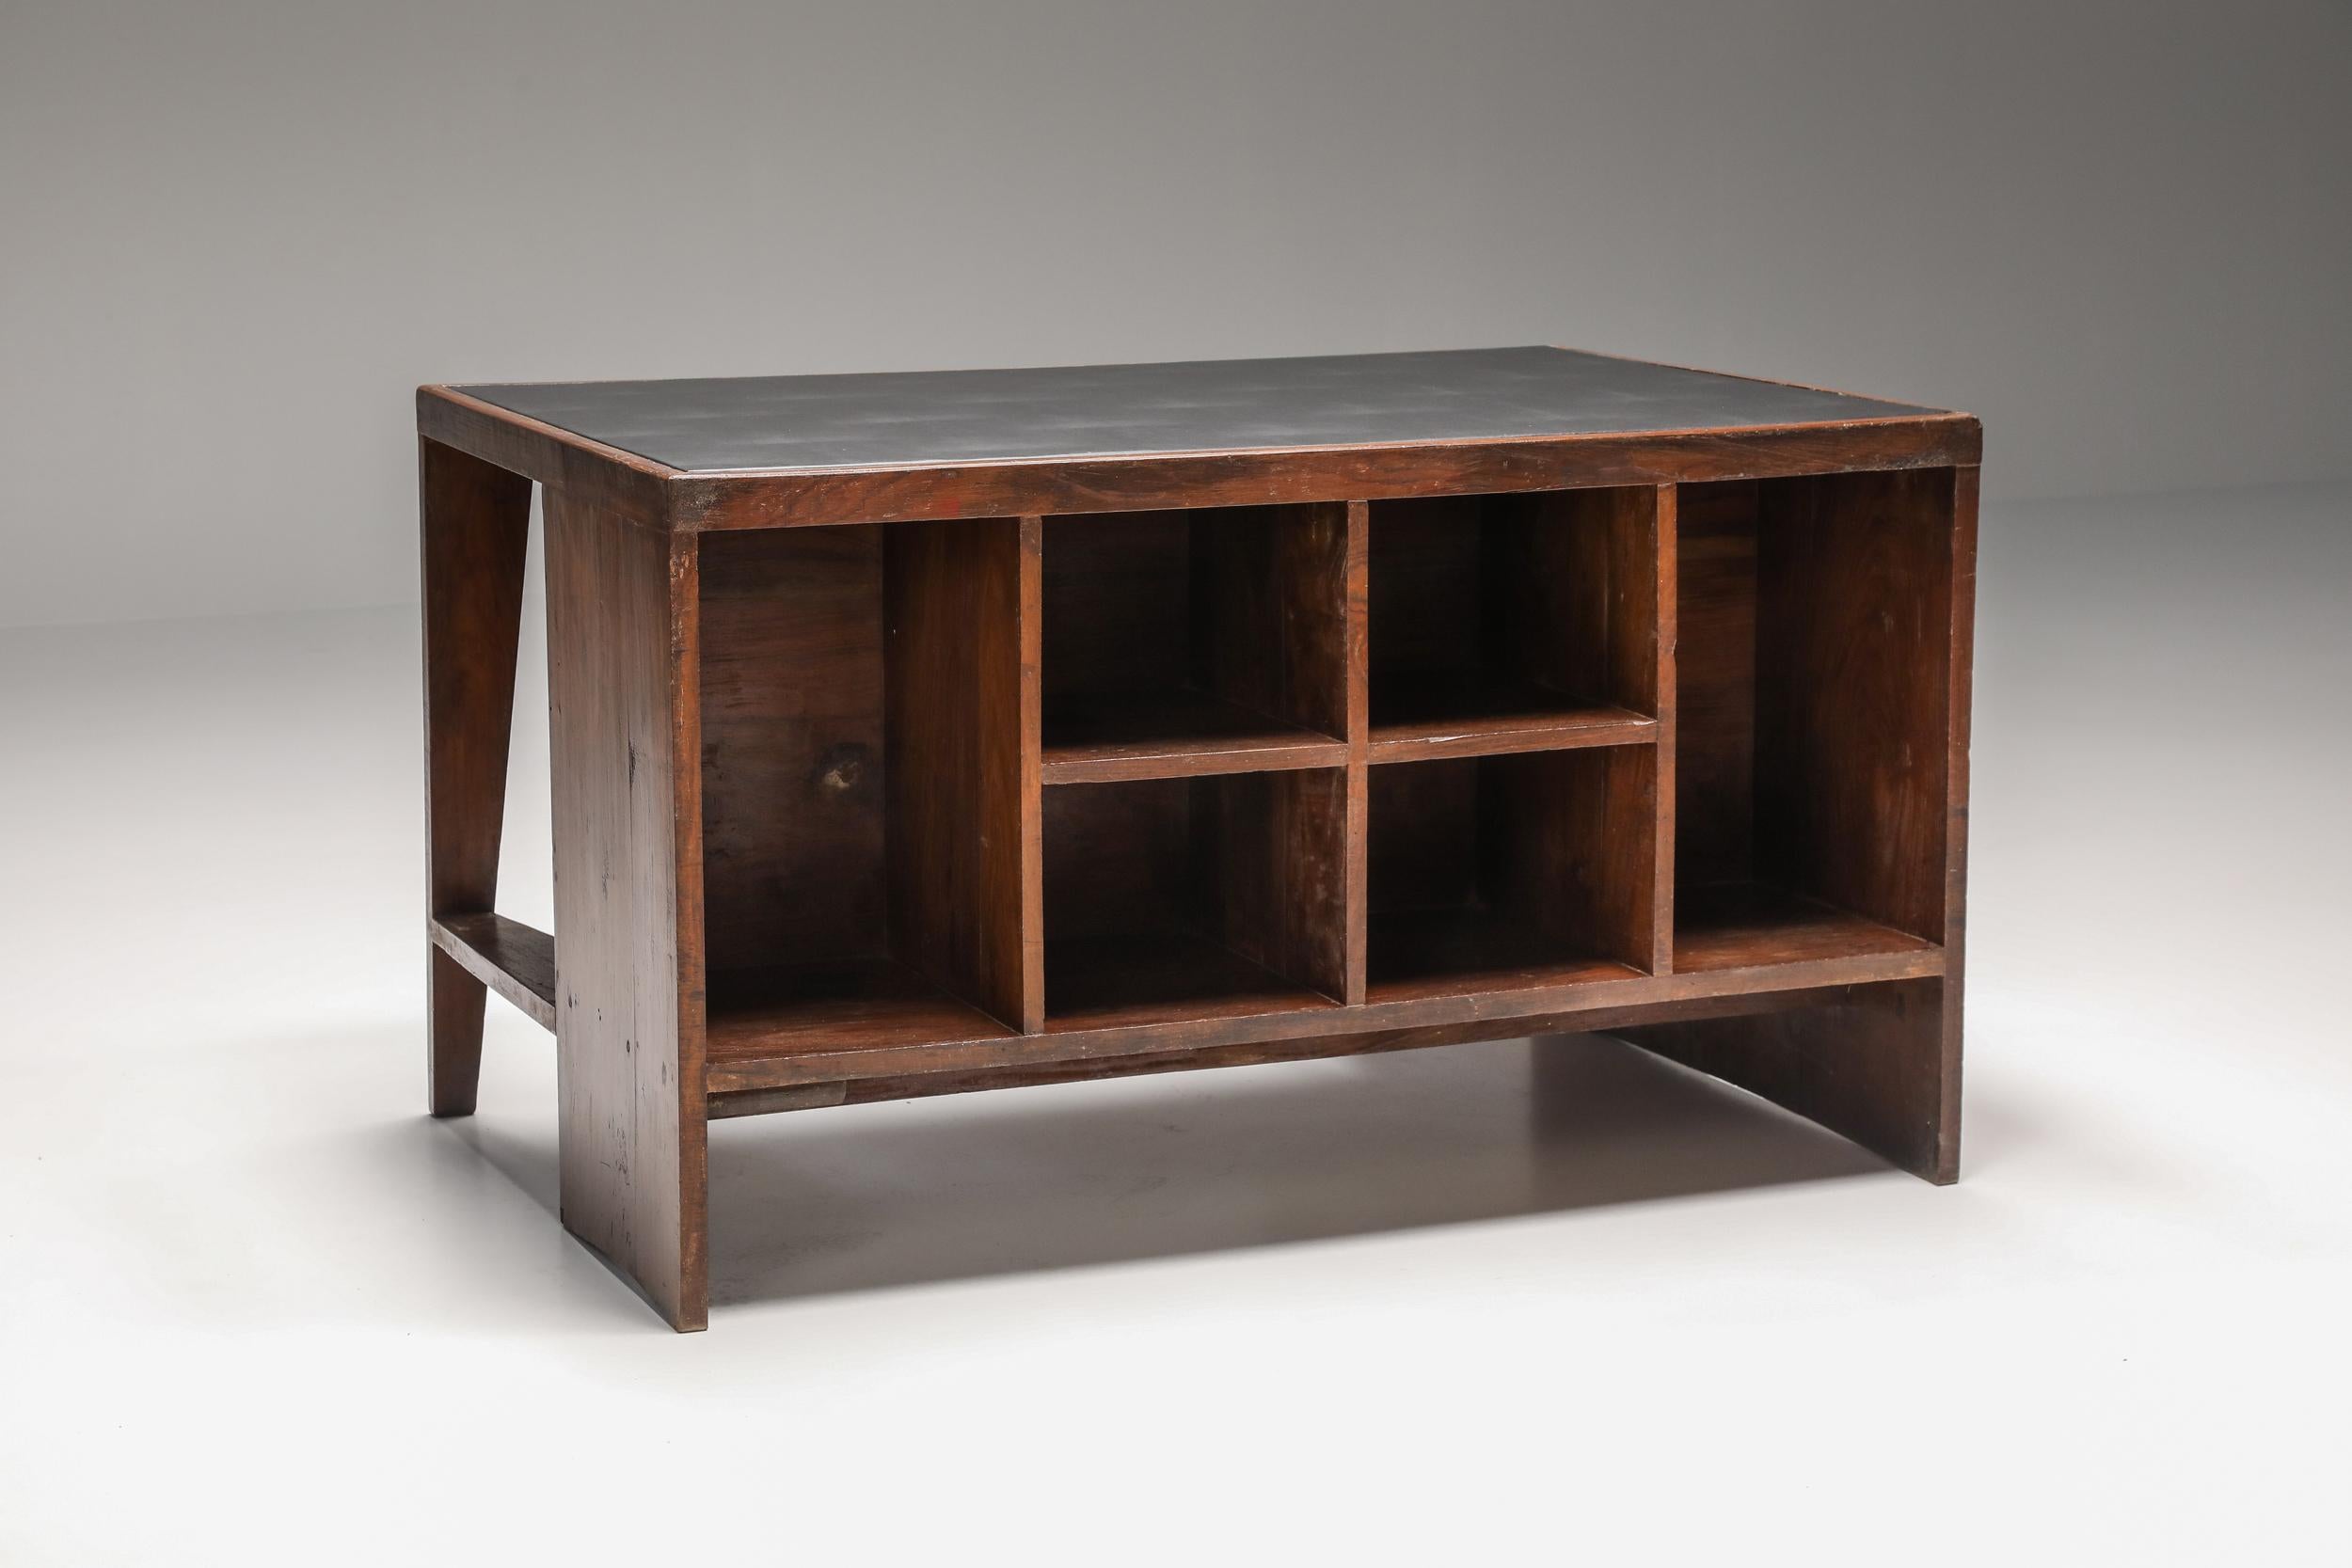 Pierre Jeanneret, Chandigarh Pigeonhole office desk, circa 1957-1958

This charismatic office desk was Intended for the secretariat and various administrative buildings in Chandigarh, India.
  